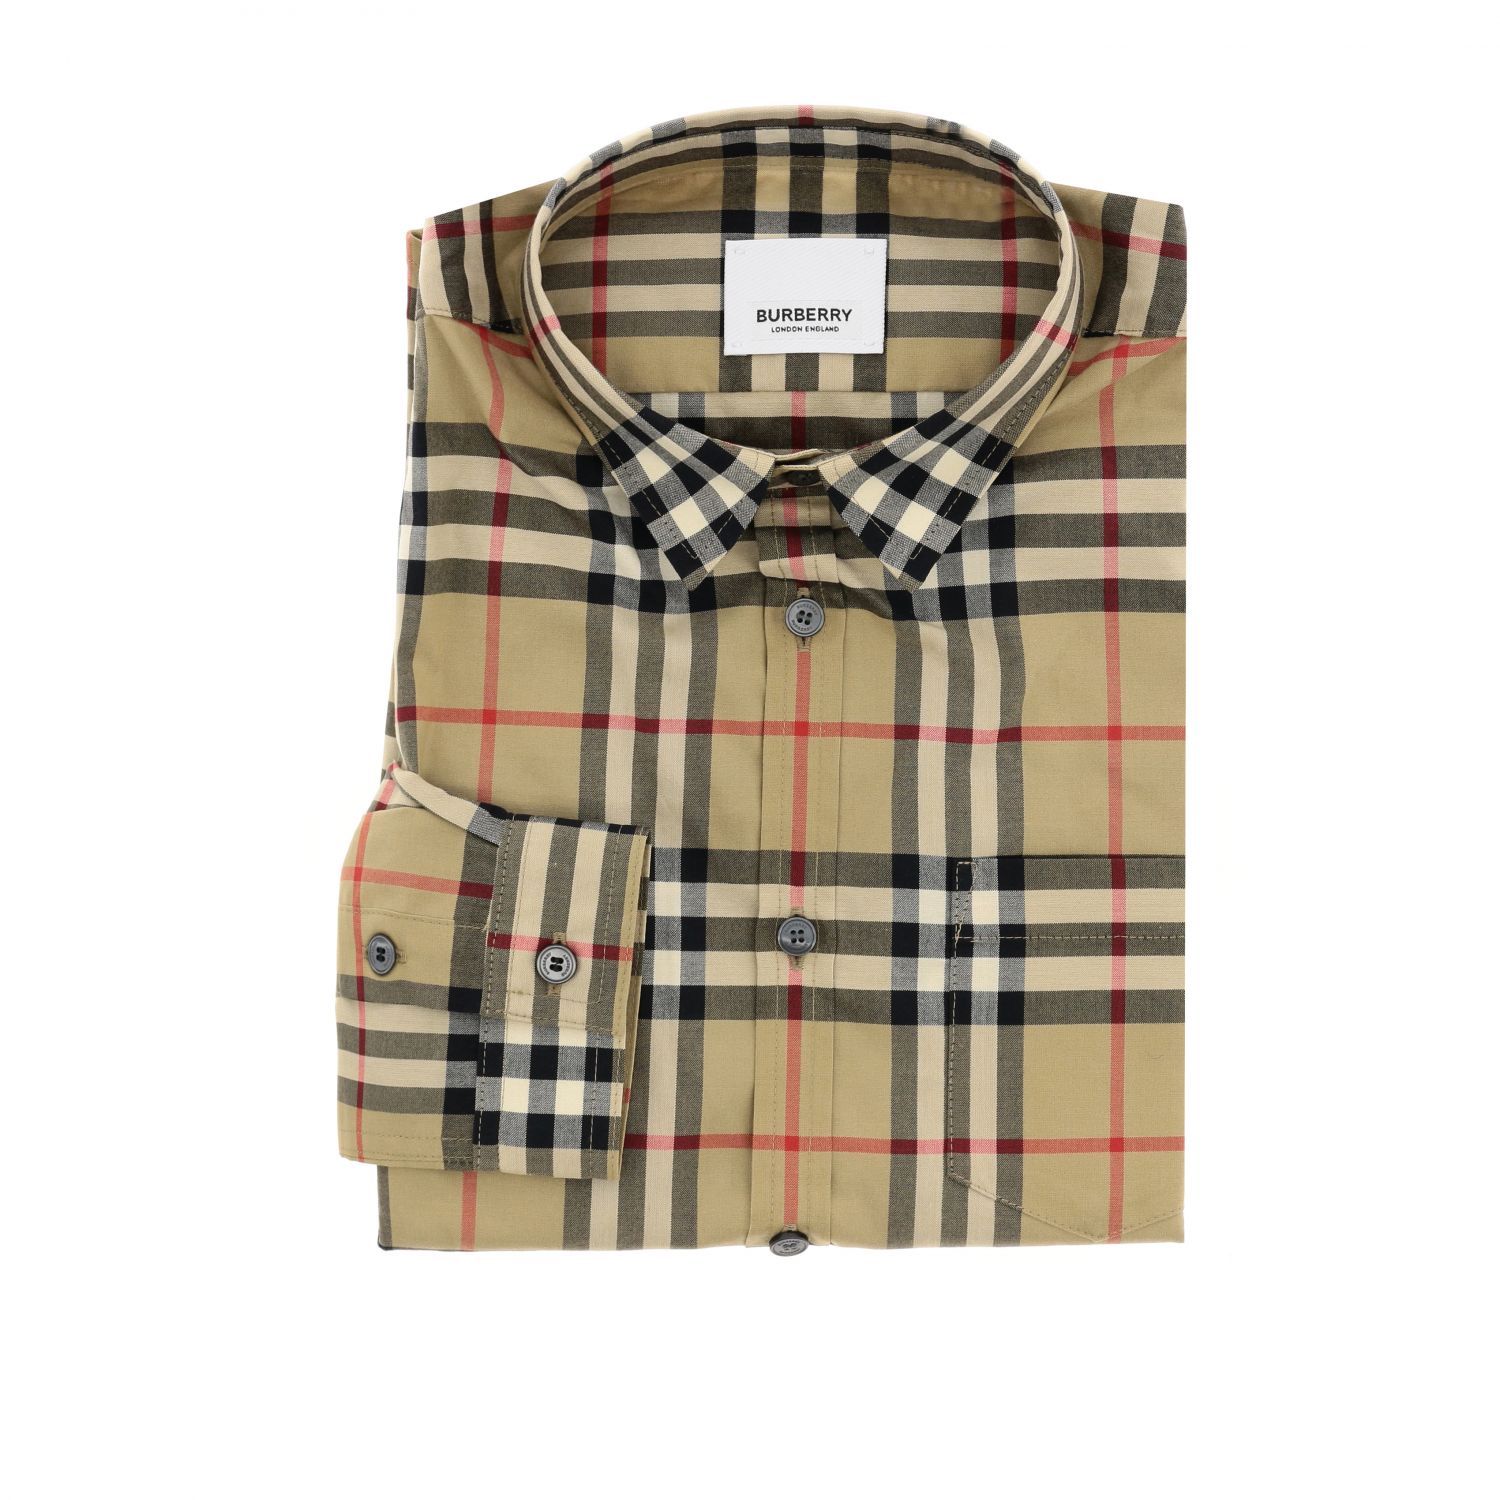 kids burberry outfit